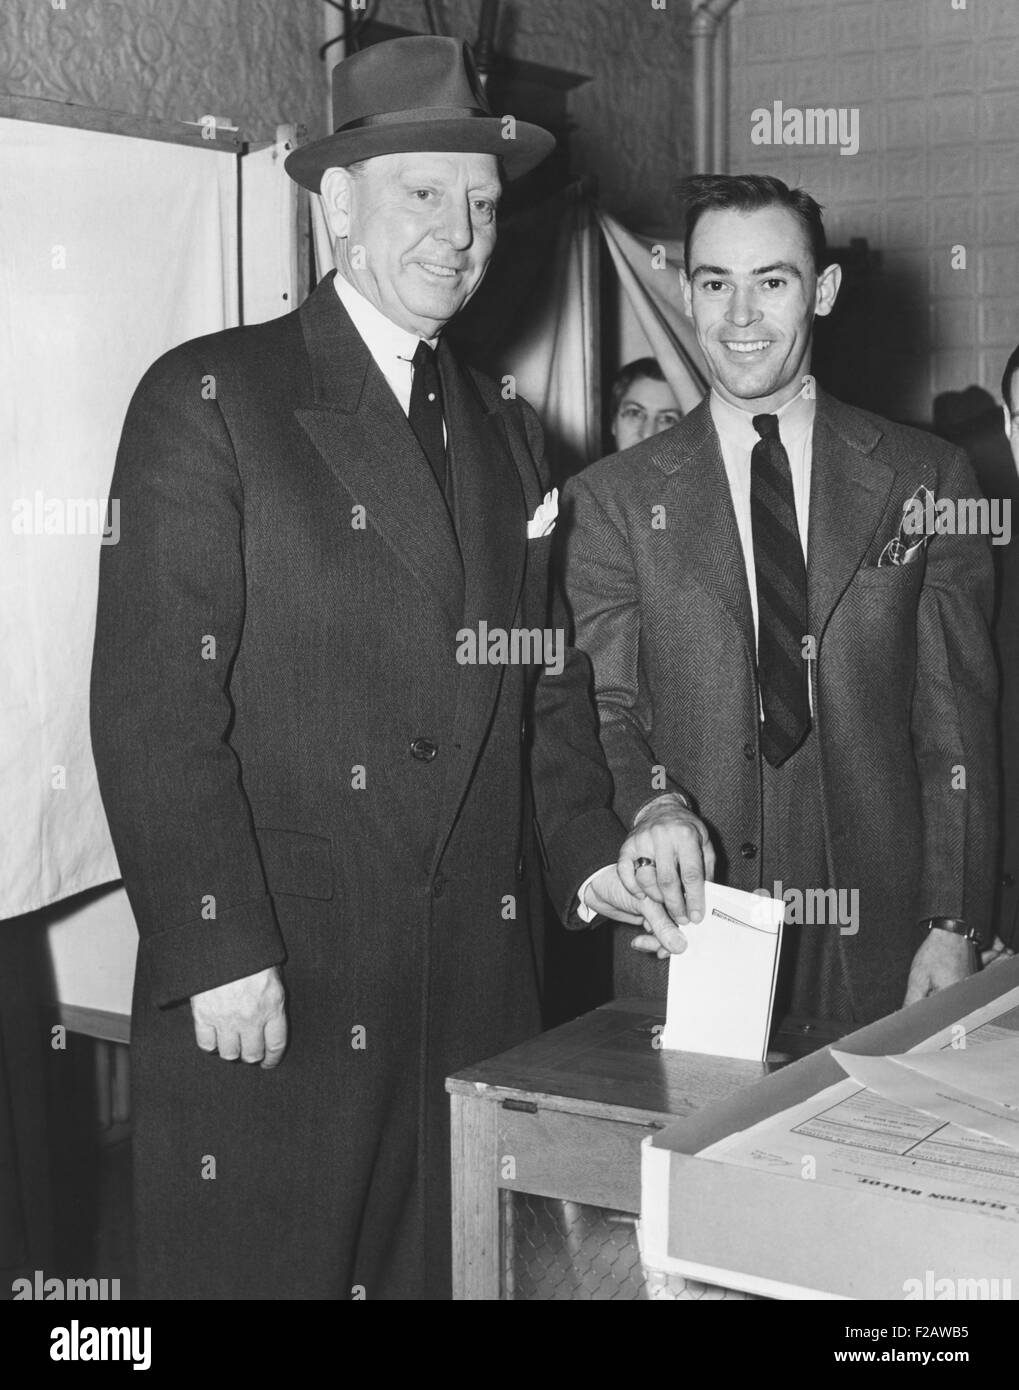 Jersey City Mayor Frank Hagen (left) casting his vote in the general election on Nov. 5, 1941. He was a powerful, entrenched, old style city boss and was Mayor from 1917 to 1947. He had wealth of an estimated $10 million when he retired from a job that never paid more than $8500 annually. (CSU 2015 11 1440) Stock Photo